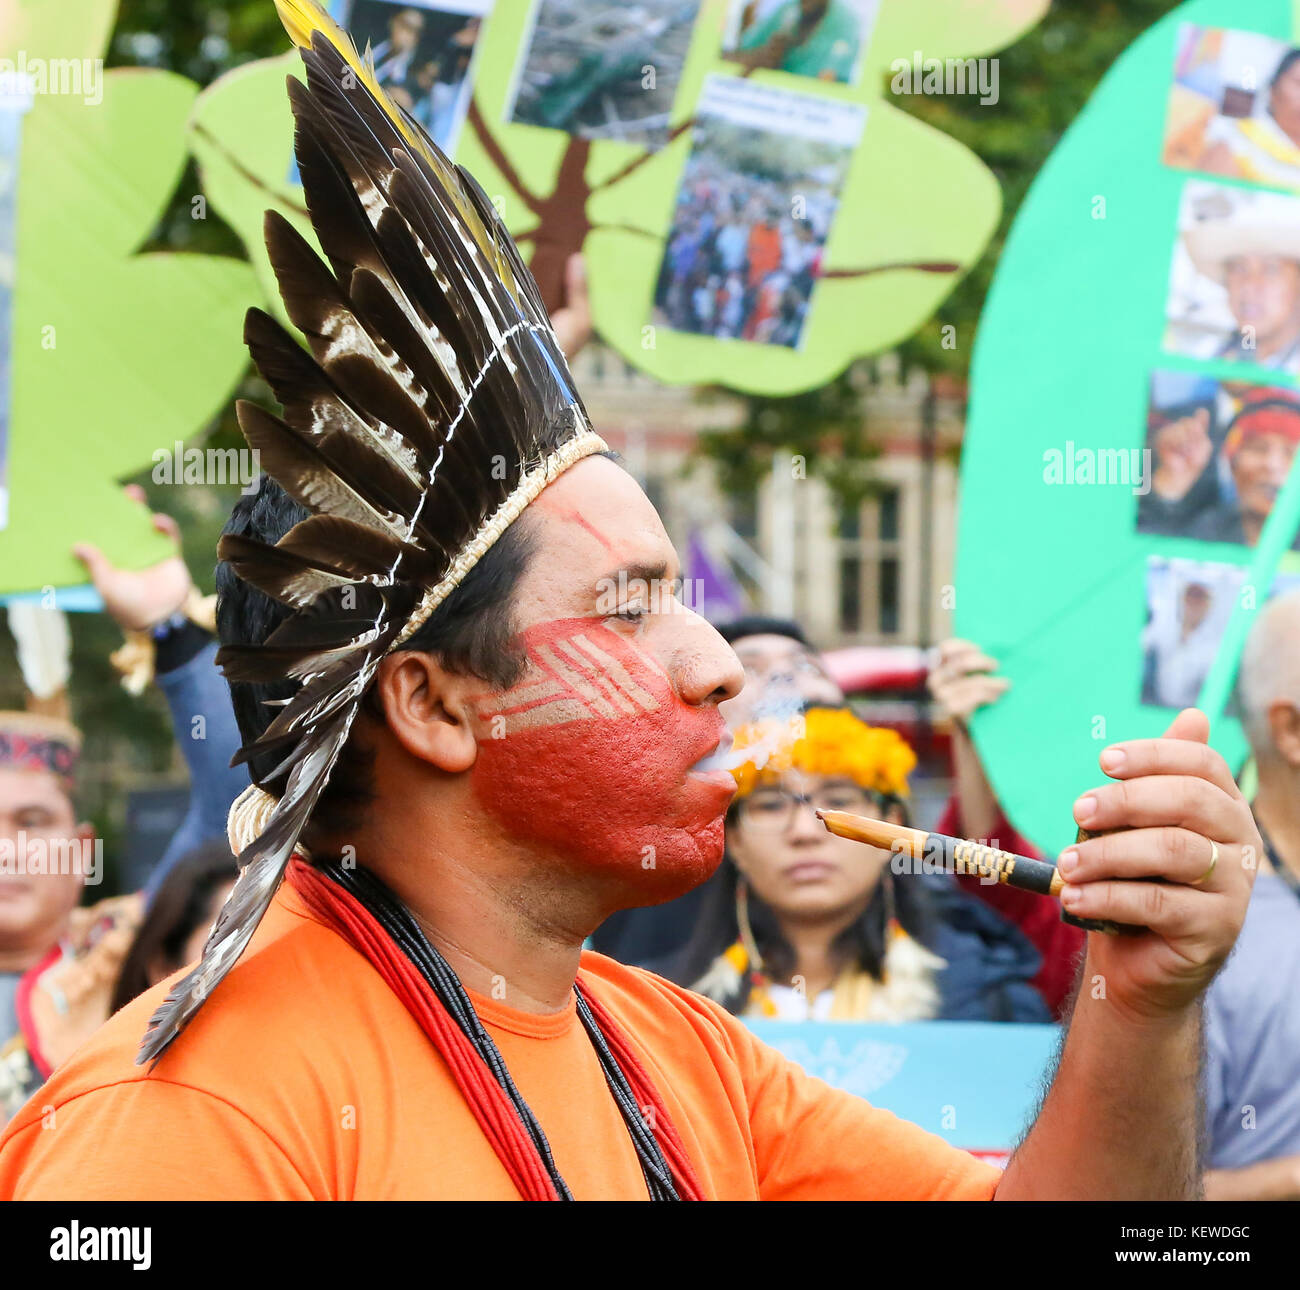 Parliament Square, London, Uk 24 Oct 2017 - A group of peoples from the forests of Mesoamerica, Amazonia, the Congo Basin and Southeast Asia visits a number of European counties. Credit: Dinendra Haria/Alamy Live News Stock Photo